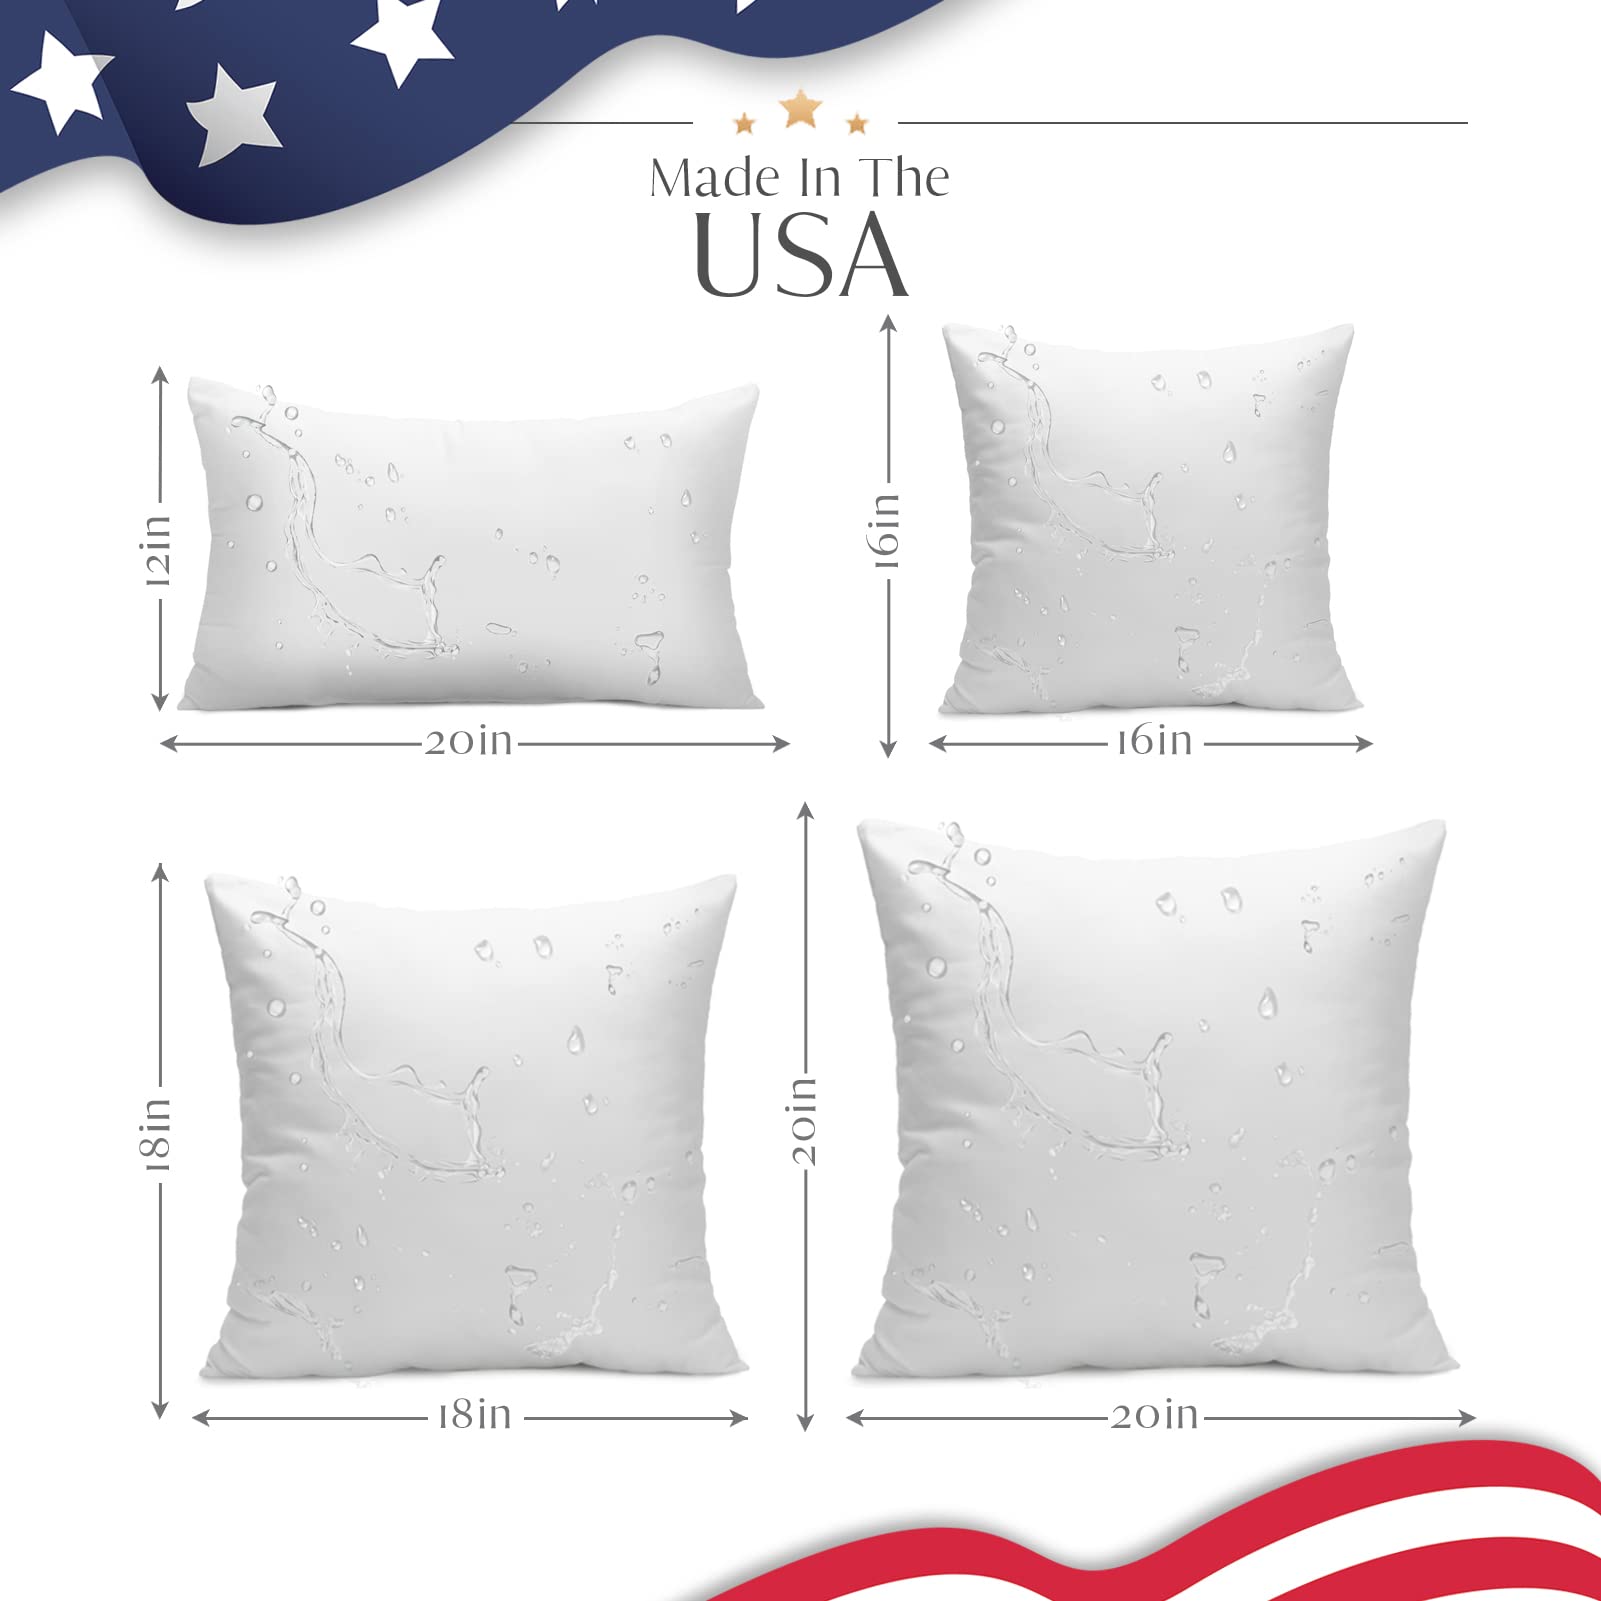 Ashler 18 x 18 Outdoor Pillow Inserts Set of 2, Made in USA, Water Resistant Throw Pillow Inserts Hypoallergenic Pillow Insert for Indoor Outdoor Spring Decorative